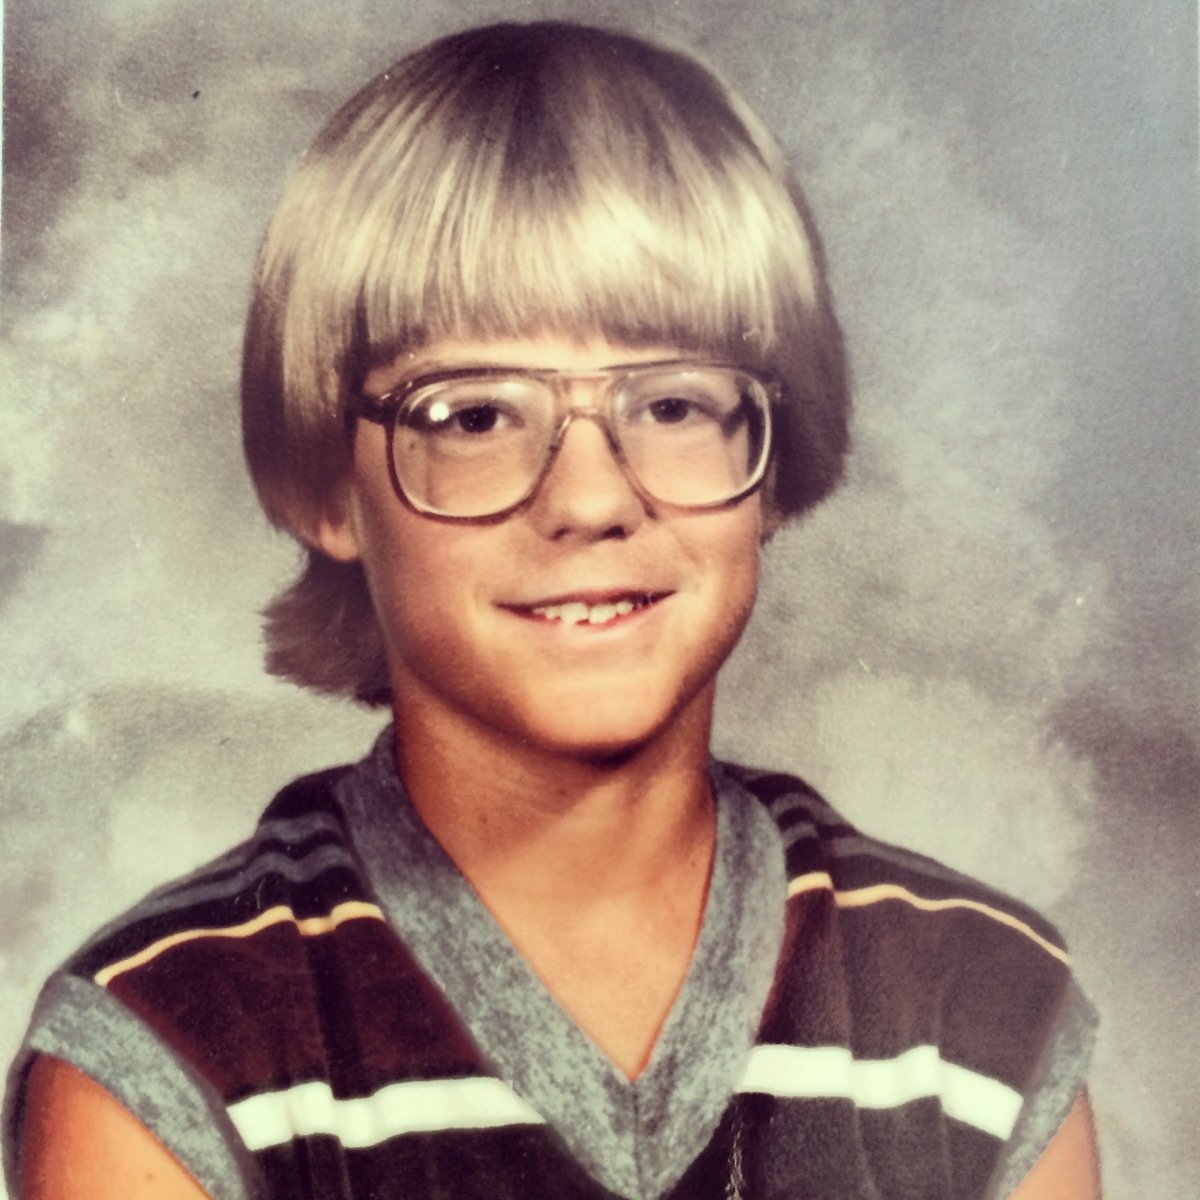 a very dorky blonde kid in 1984